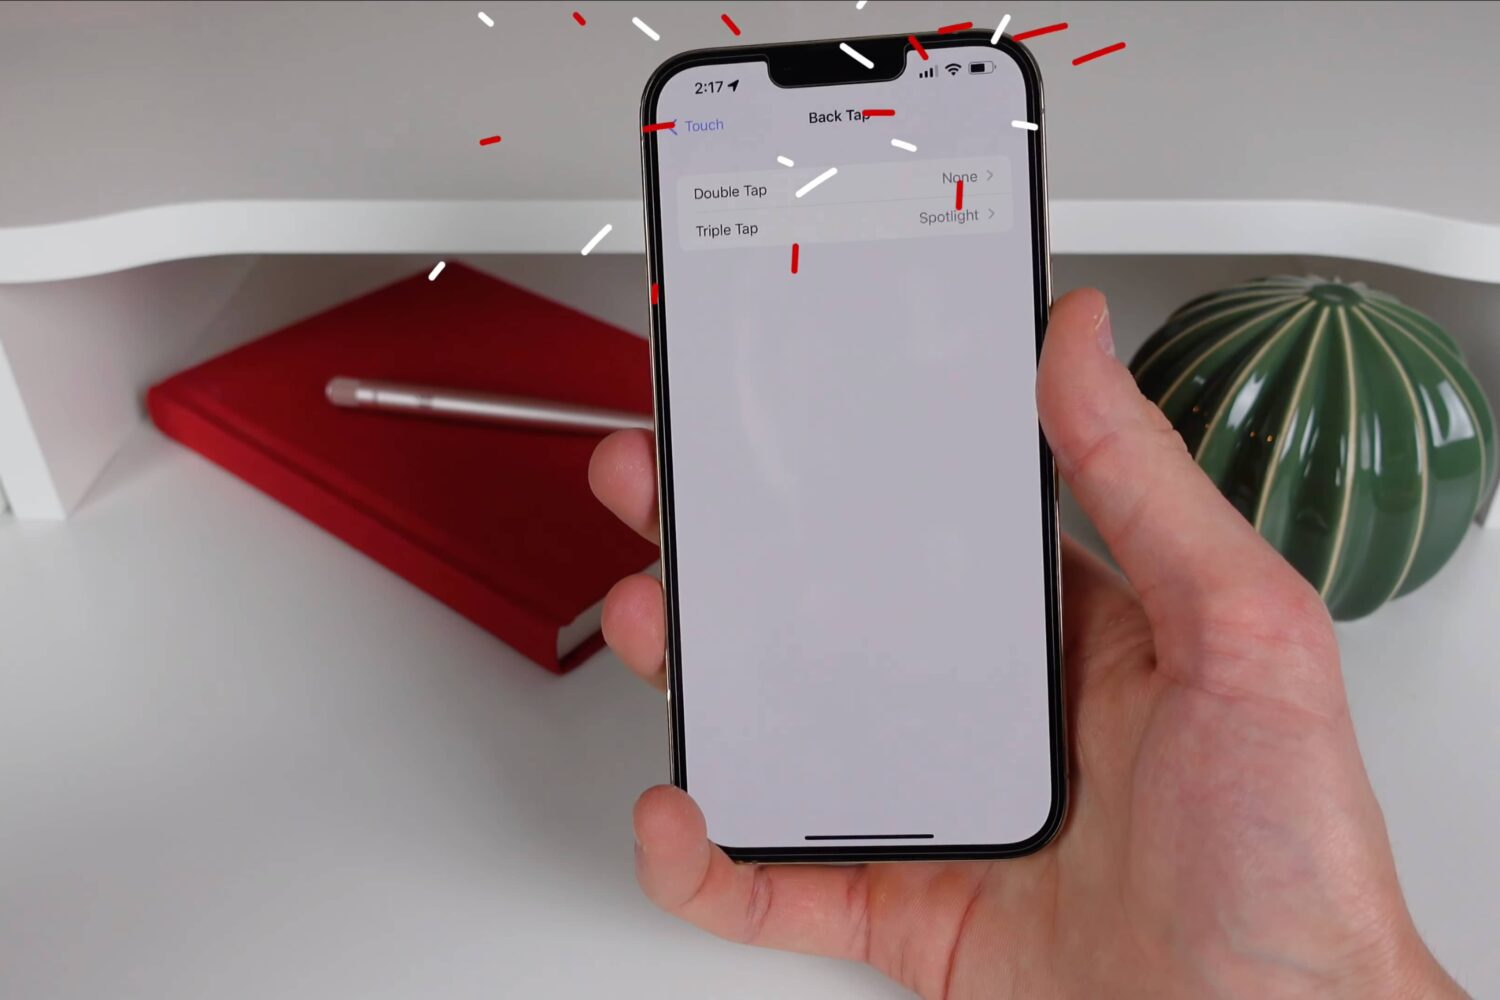 A still from iDownloadBlog's iPhone tips video showcasing Apple's Back Tap feature in action